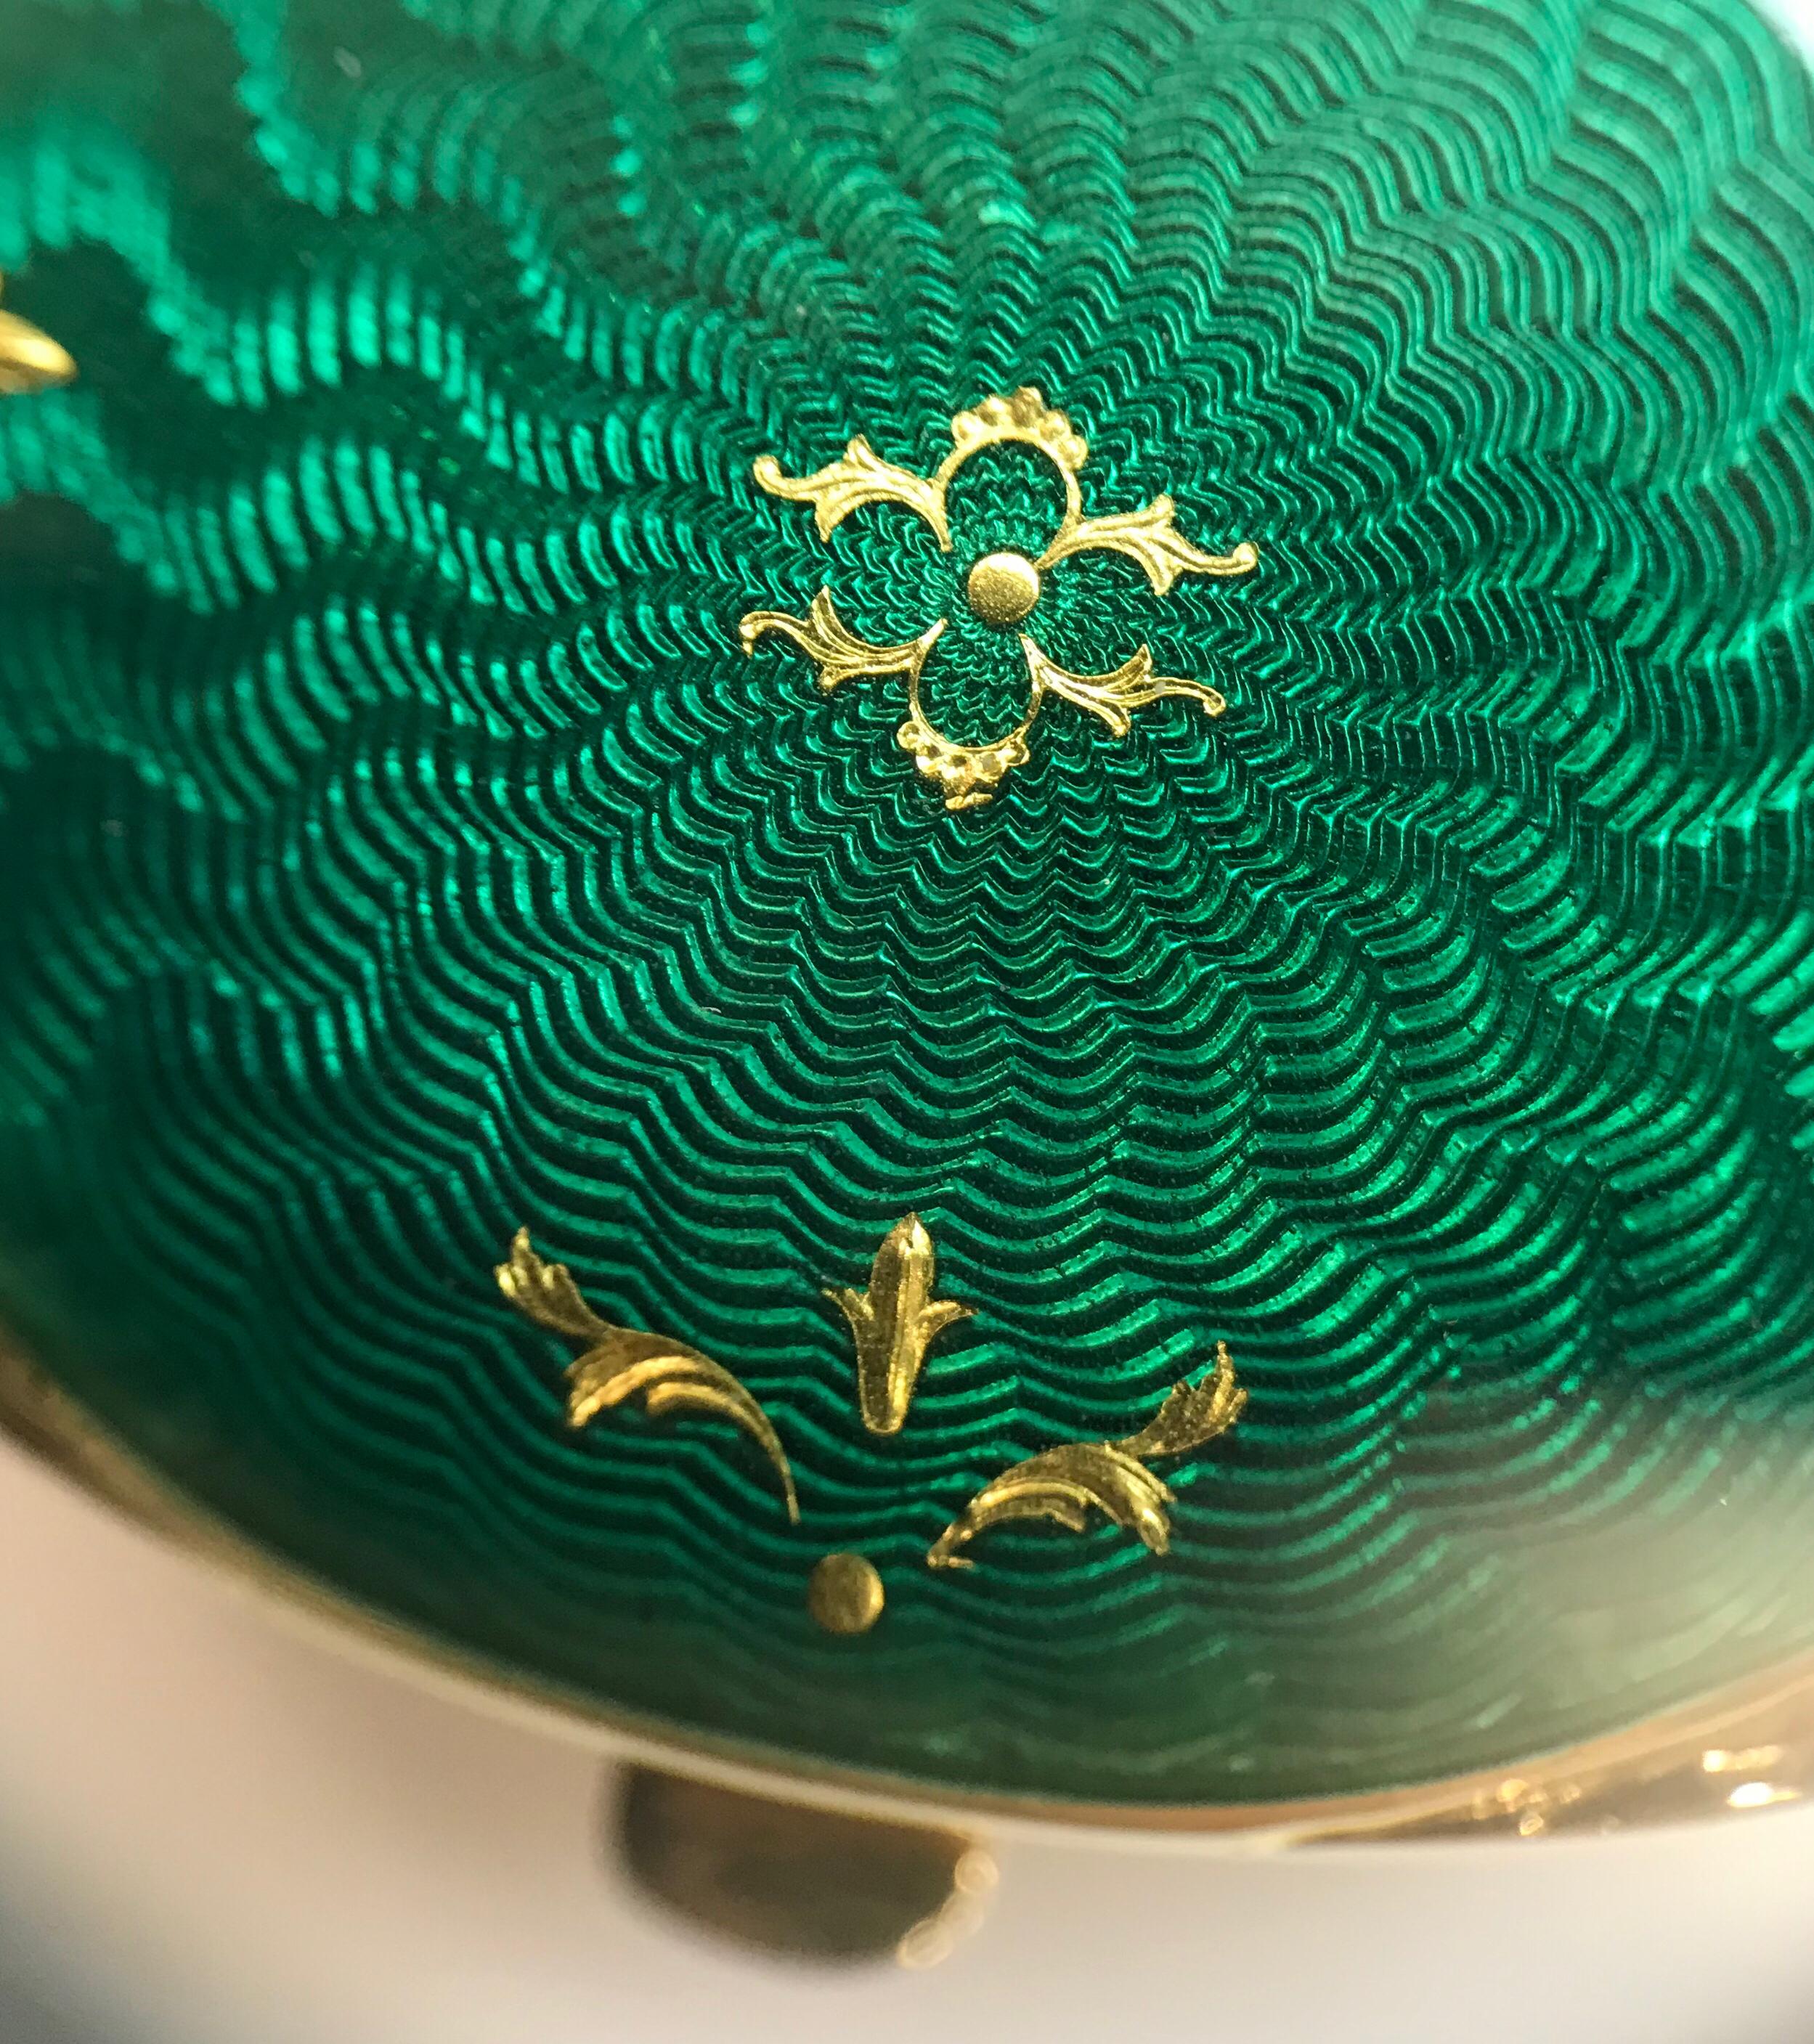 Contemporary Fabergé Limited-Edition Yellow Gold Green Enamel Pillbox